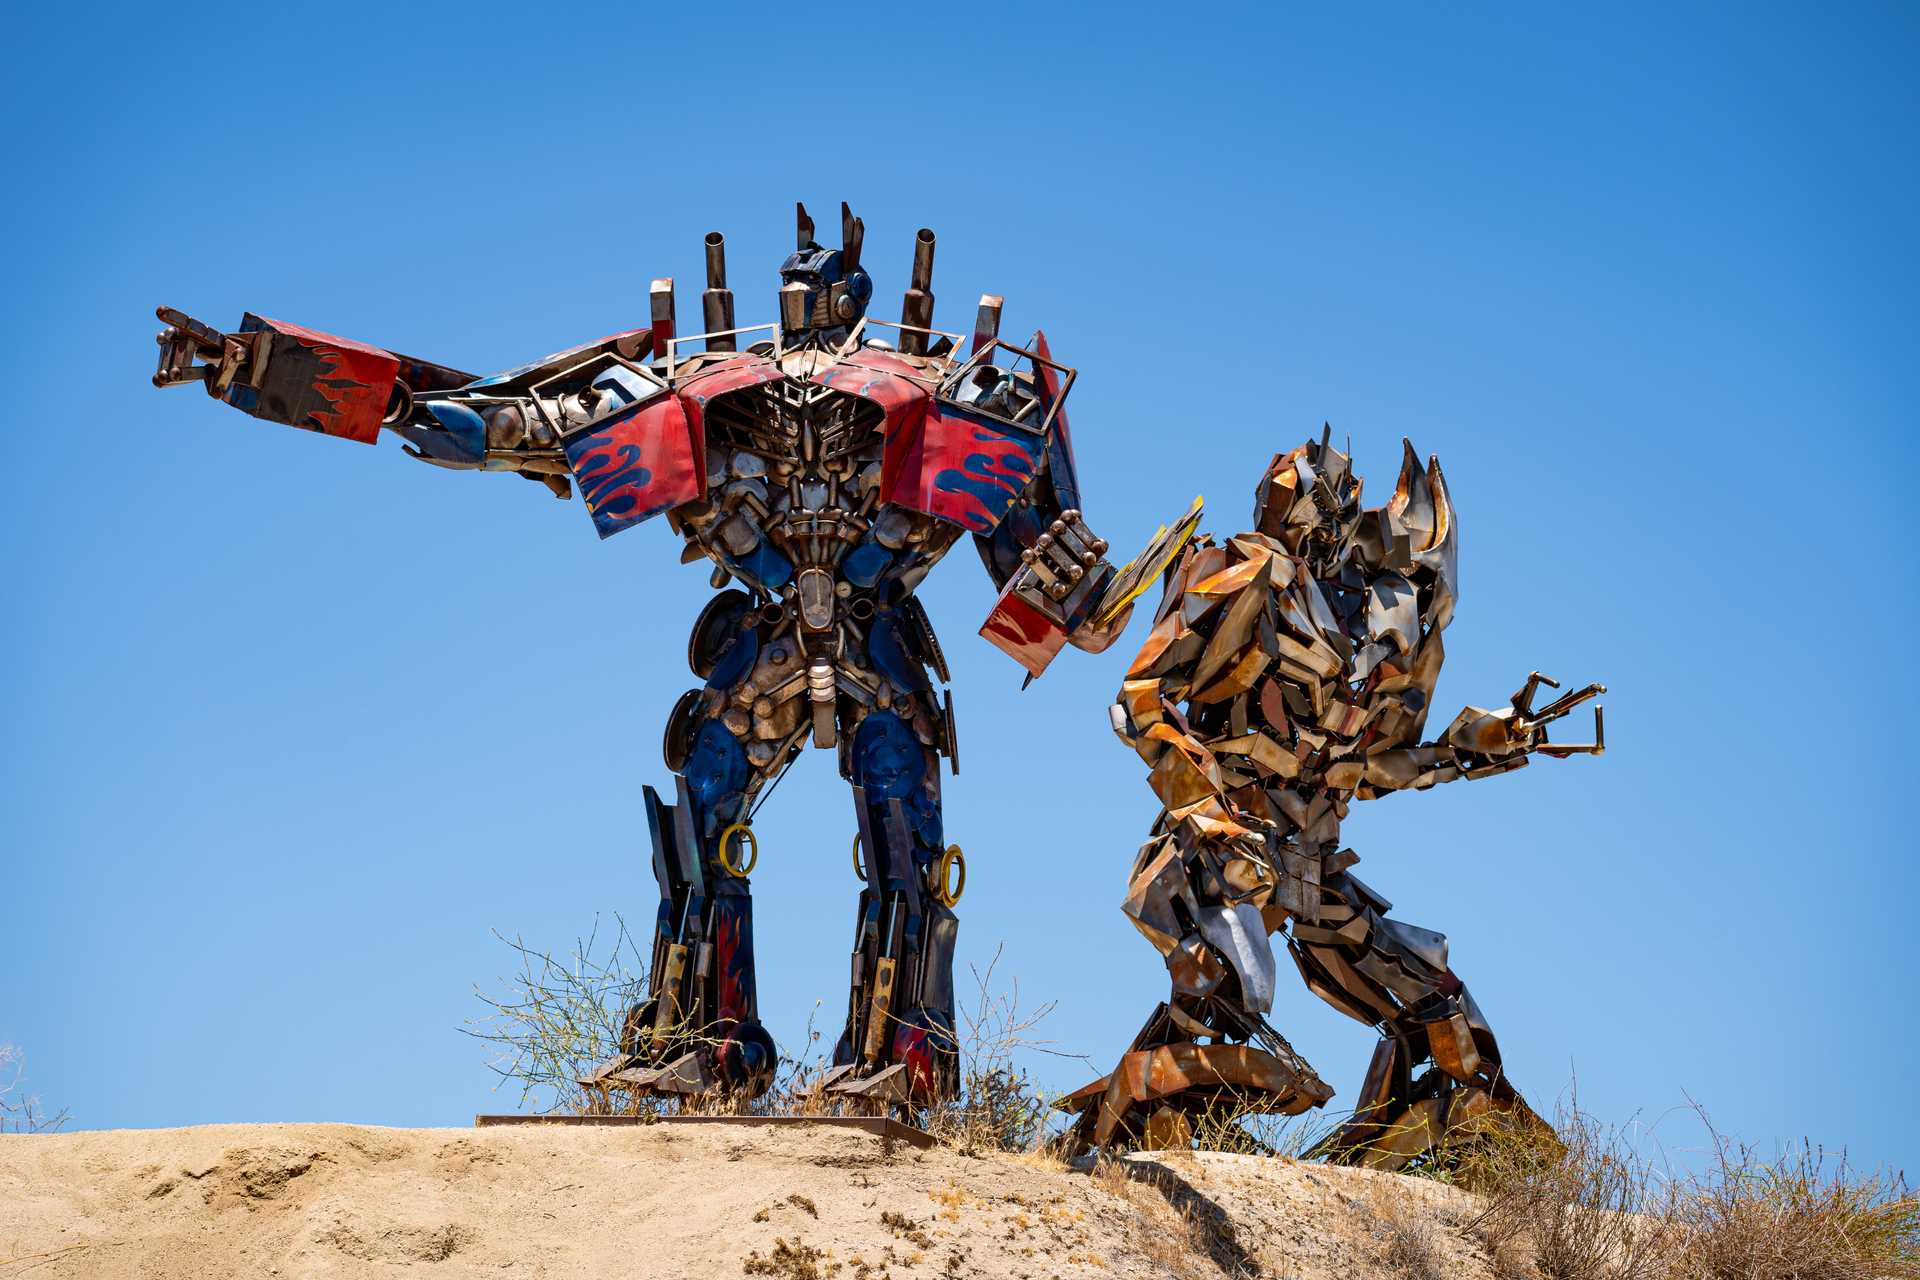 Photo by Soly Moses from Pexels: https://www.pexels.com/photo/transformers-sculpture-12334692/